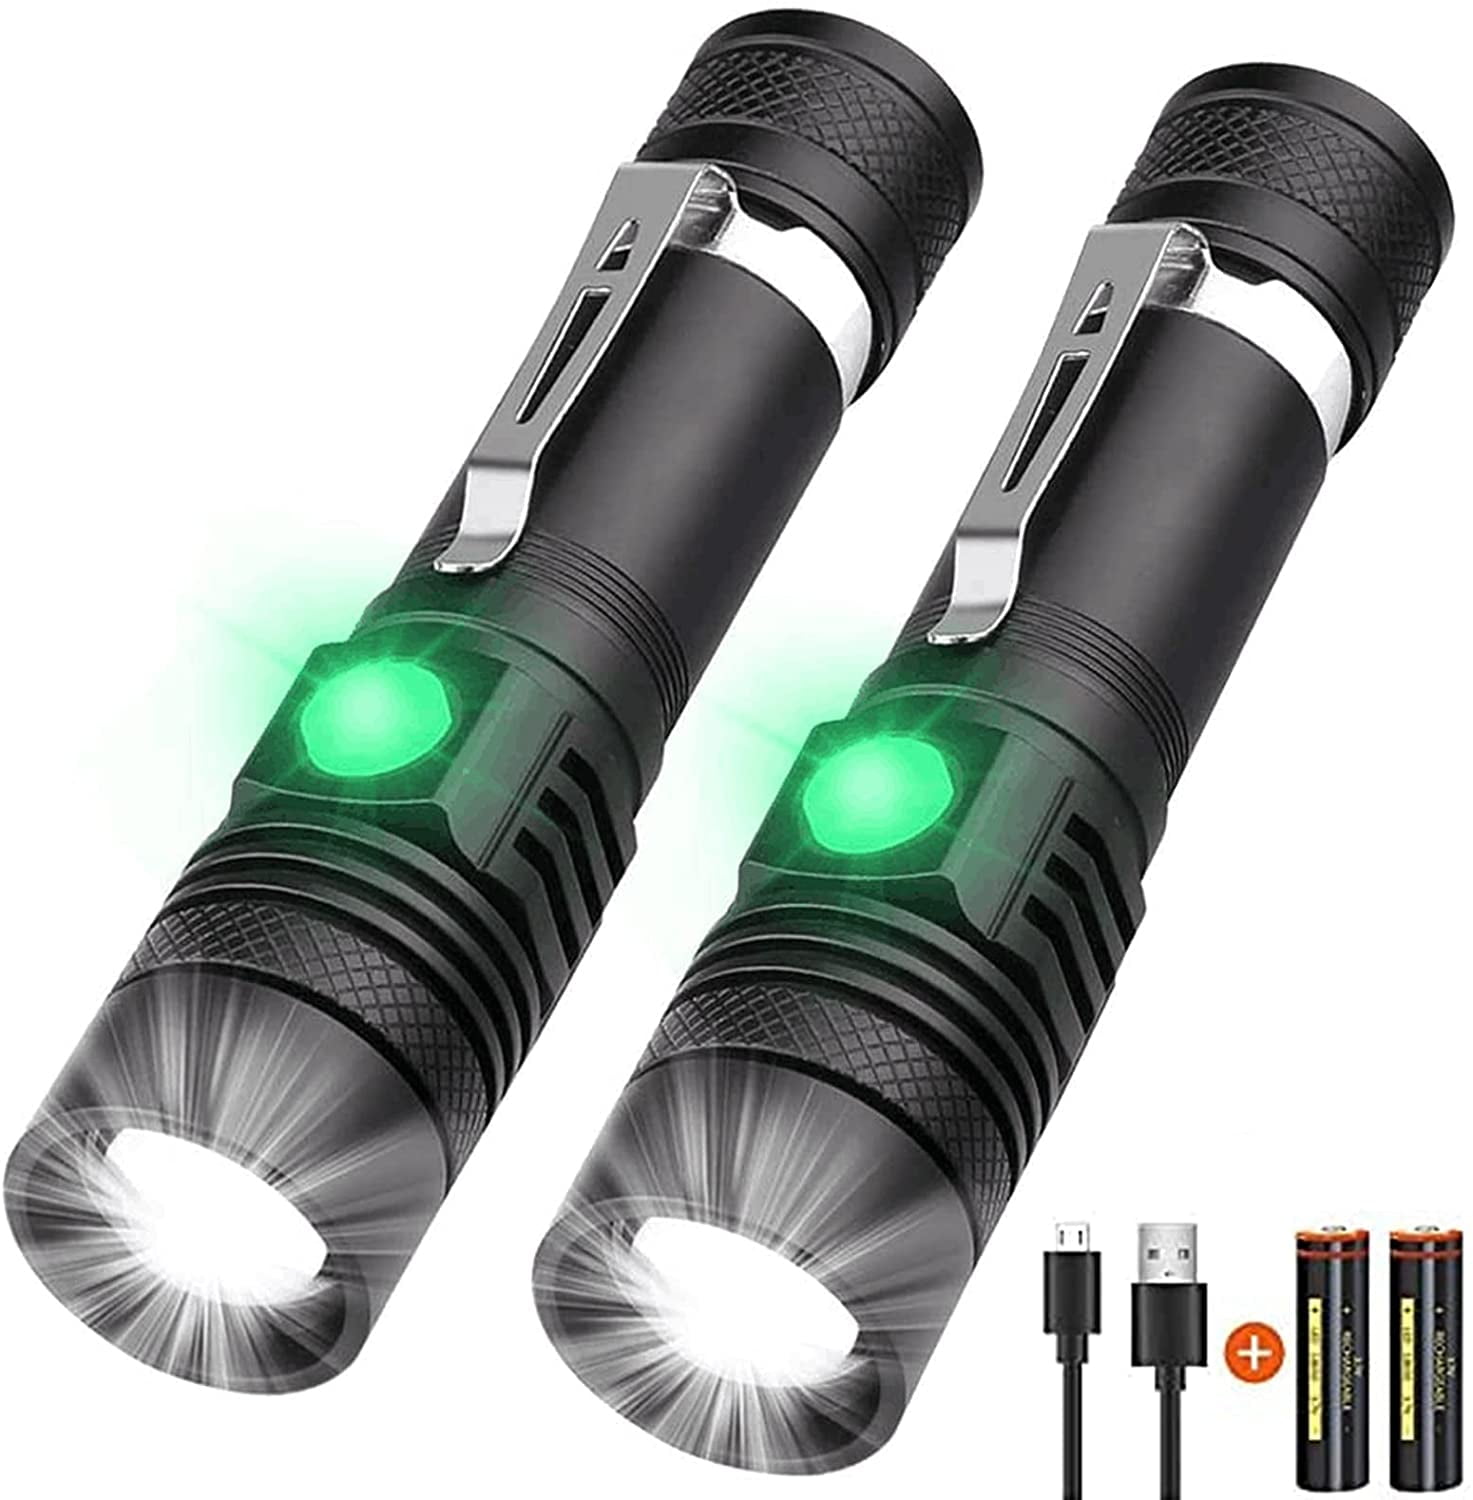 USB Rechargeable LED Torch Flashlight Waterproof Zoom Camping Outdoor Hiking 2PK 